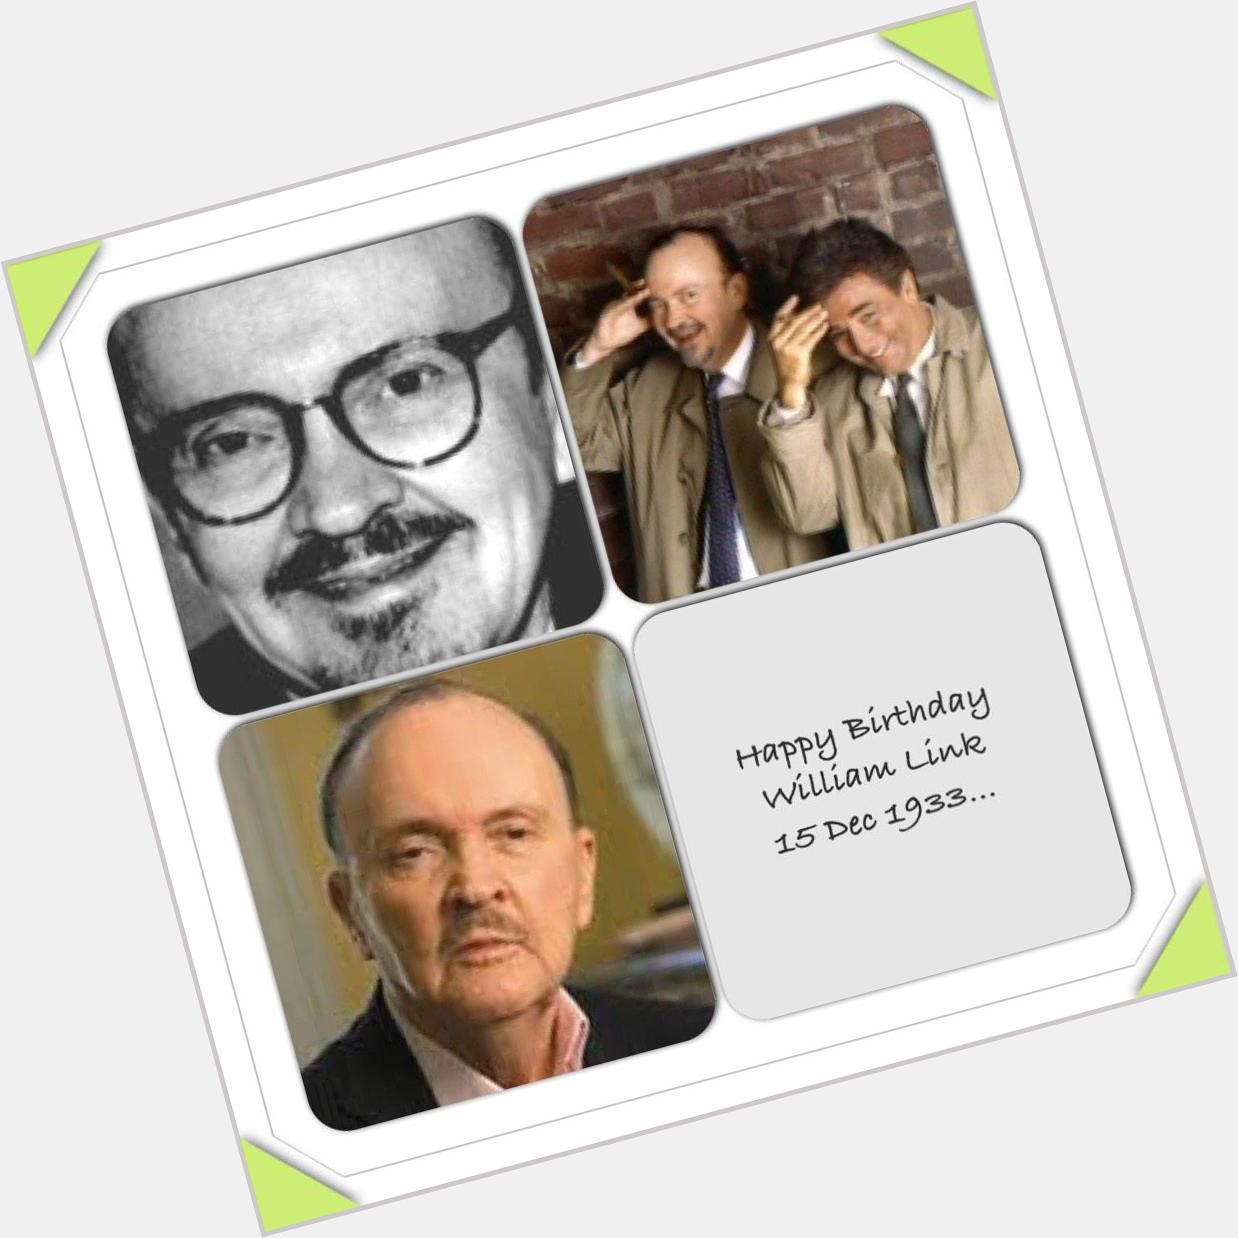 Happy Birthday co-created and producer
William Link
15th December 1933 